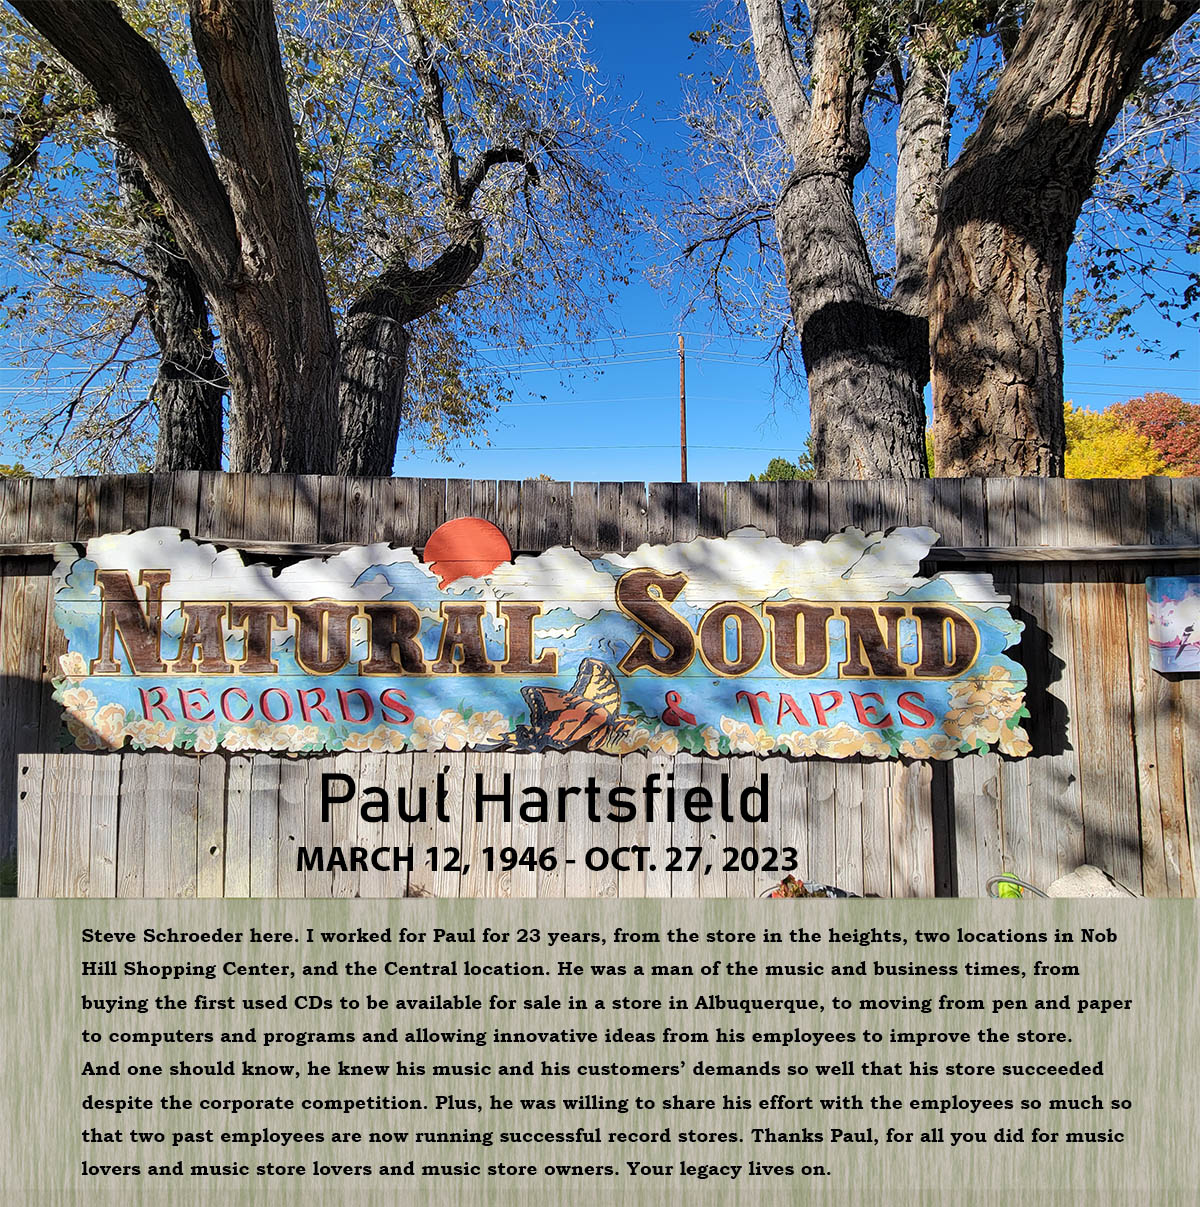 Tribute to Natural Sound founder Paul Hartsfield